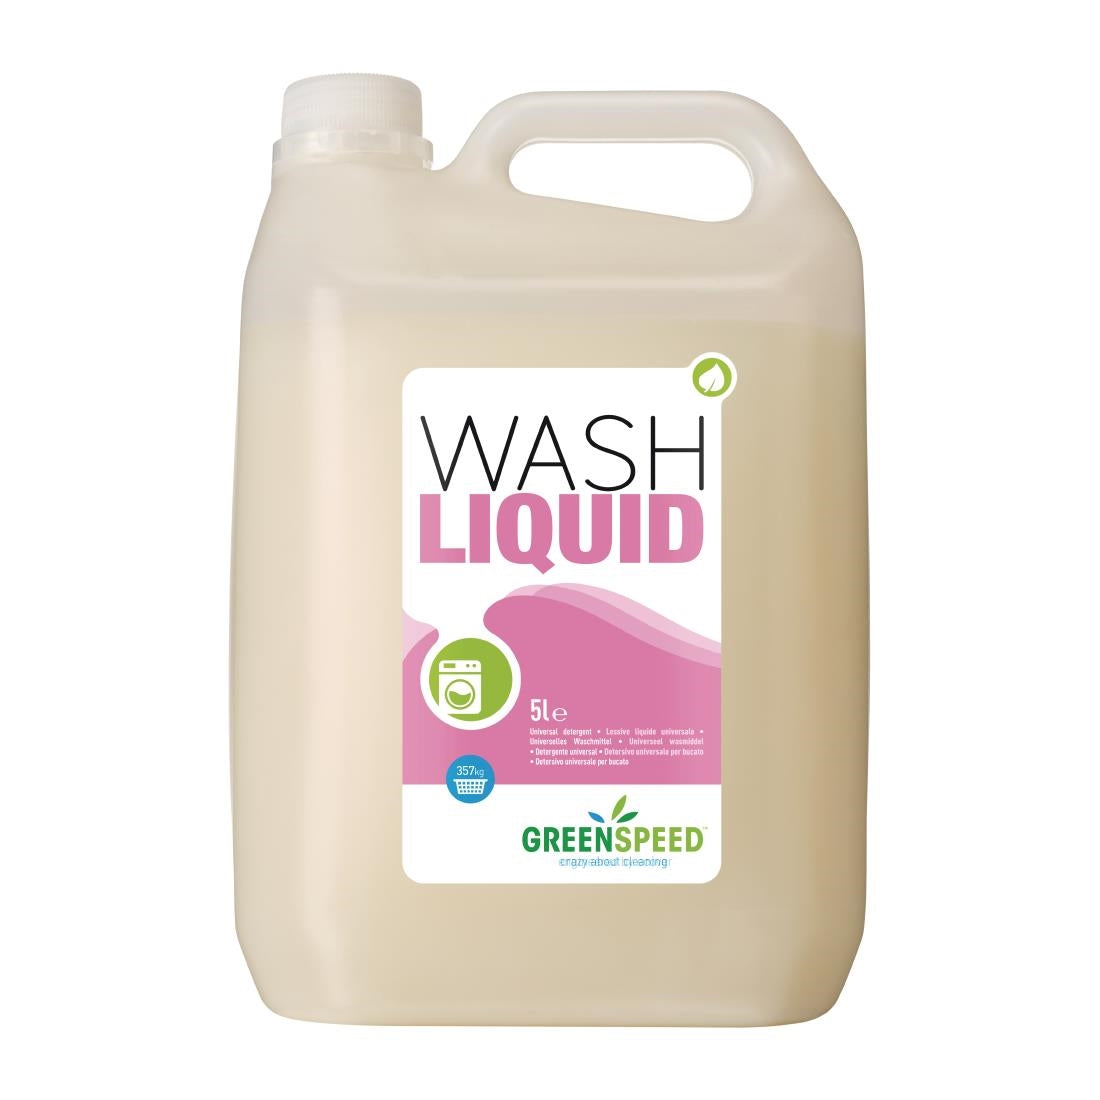 CX185 Greenspeed Biological Liquid Laundry Detergent Concentrate 5Ltr JD Catering Equipment Solutions Ltd